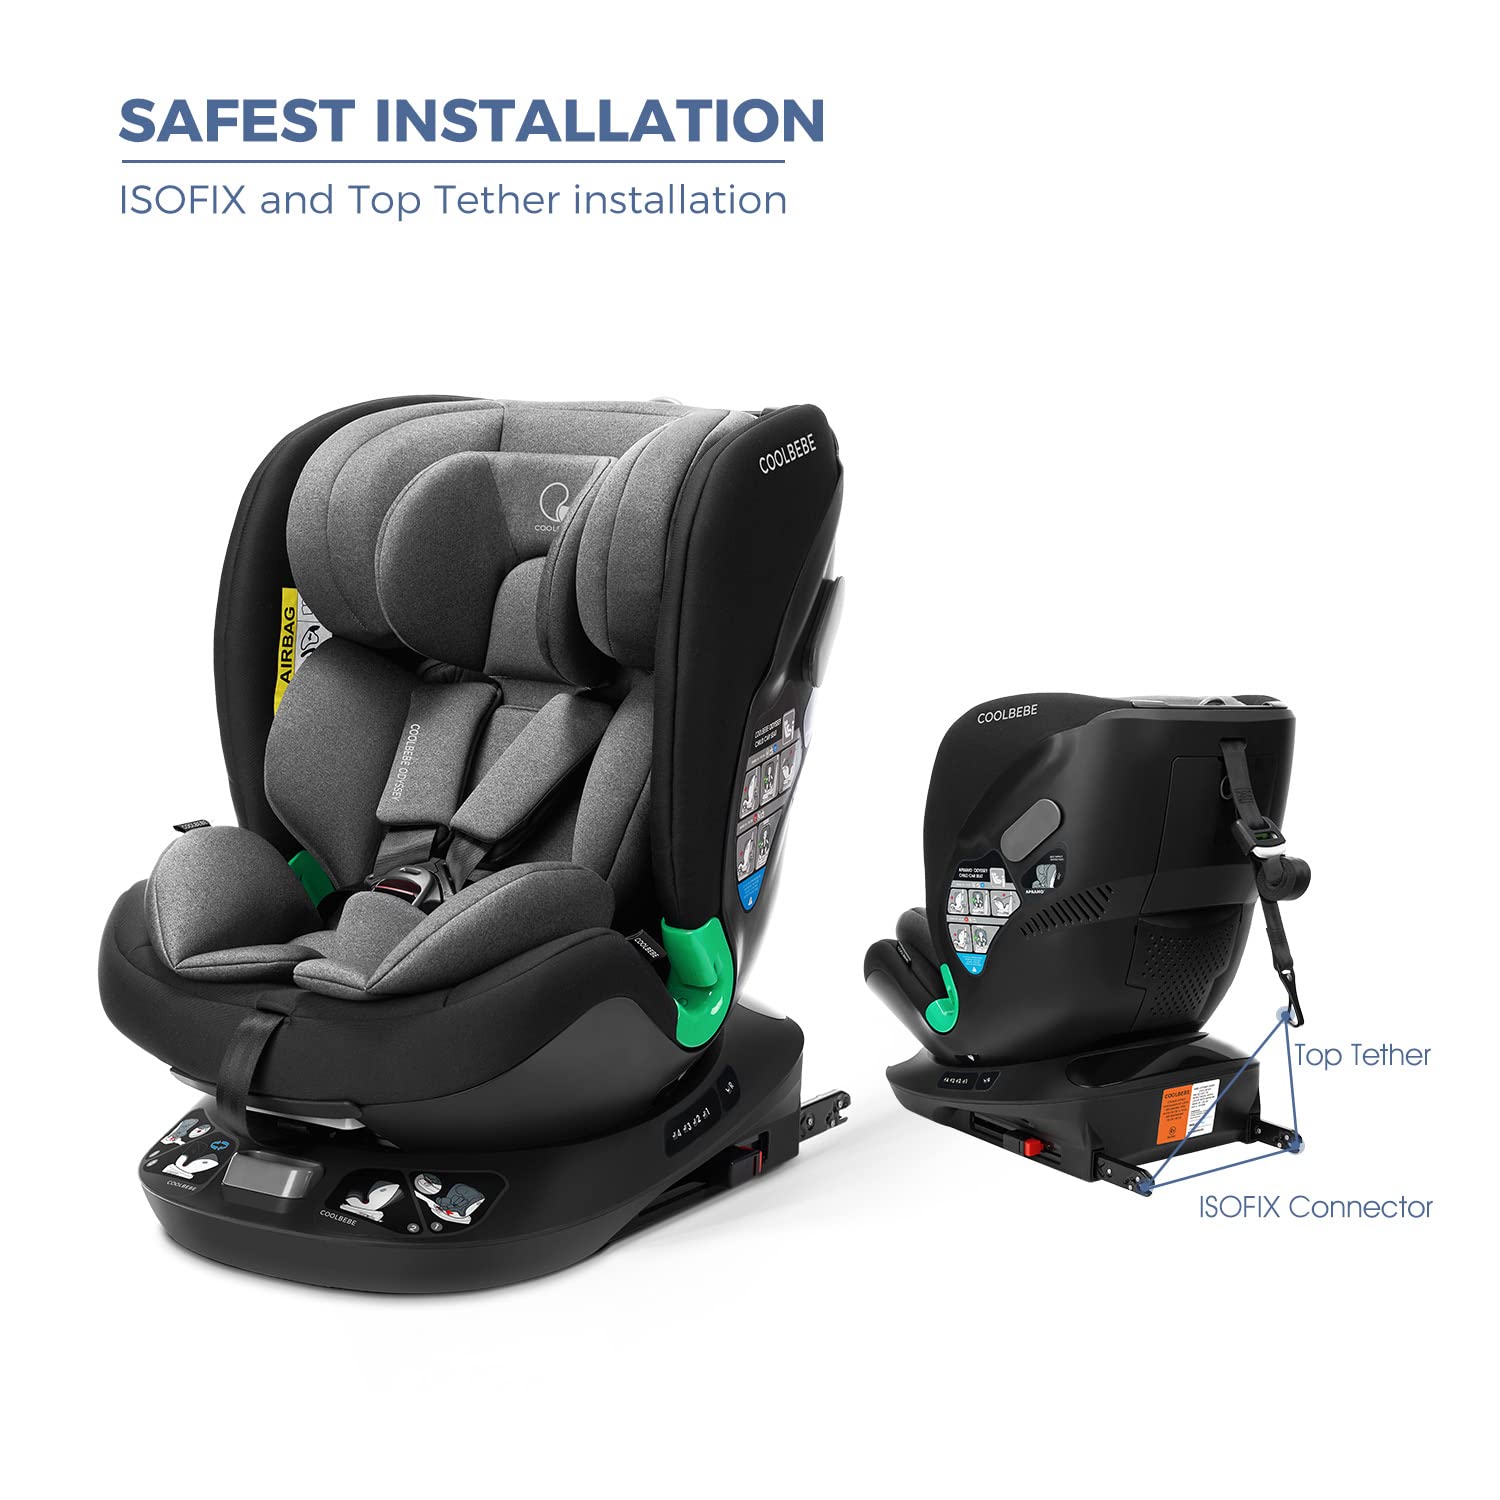 Coolbebe Odyssey 360° Rotatable Child Seat, i-Size Car Seat from 40-135 cm (0-10 Years) with ISOFIX and Top Tether for Children, with Maximum Side Impact Protection, Child Car Seat, ECE R129 (Black)